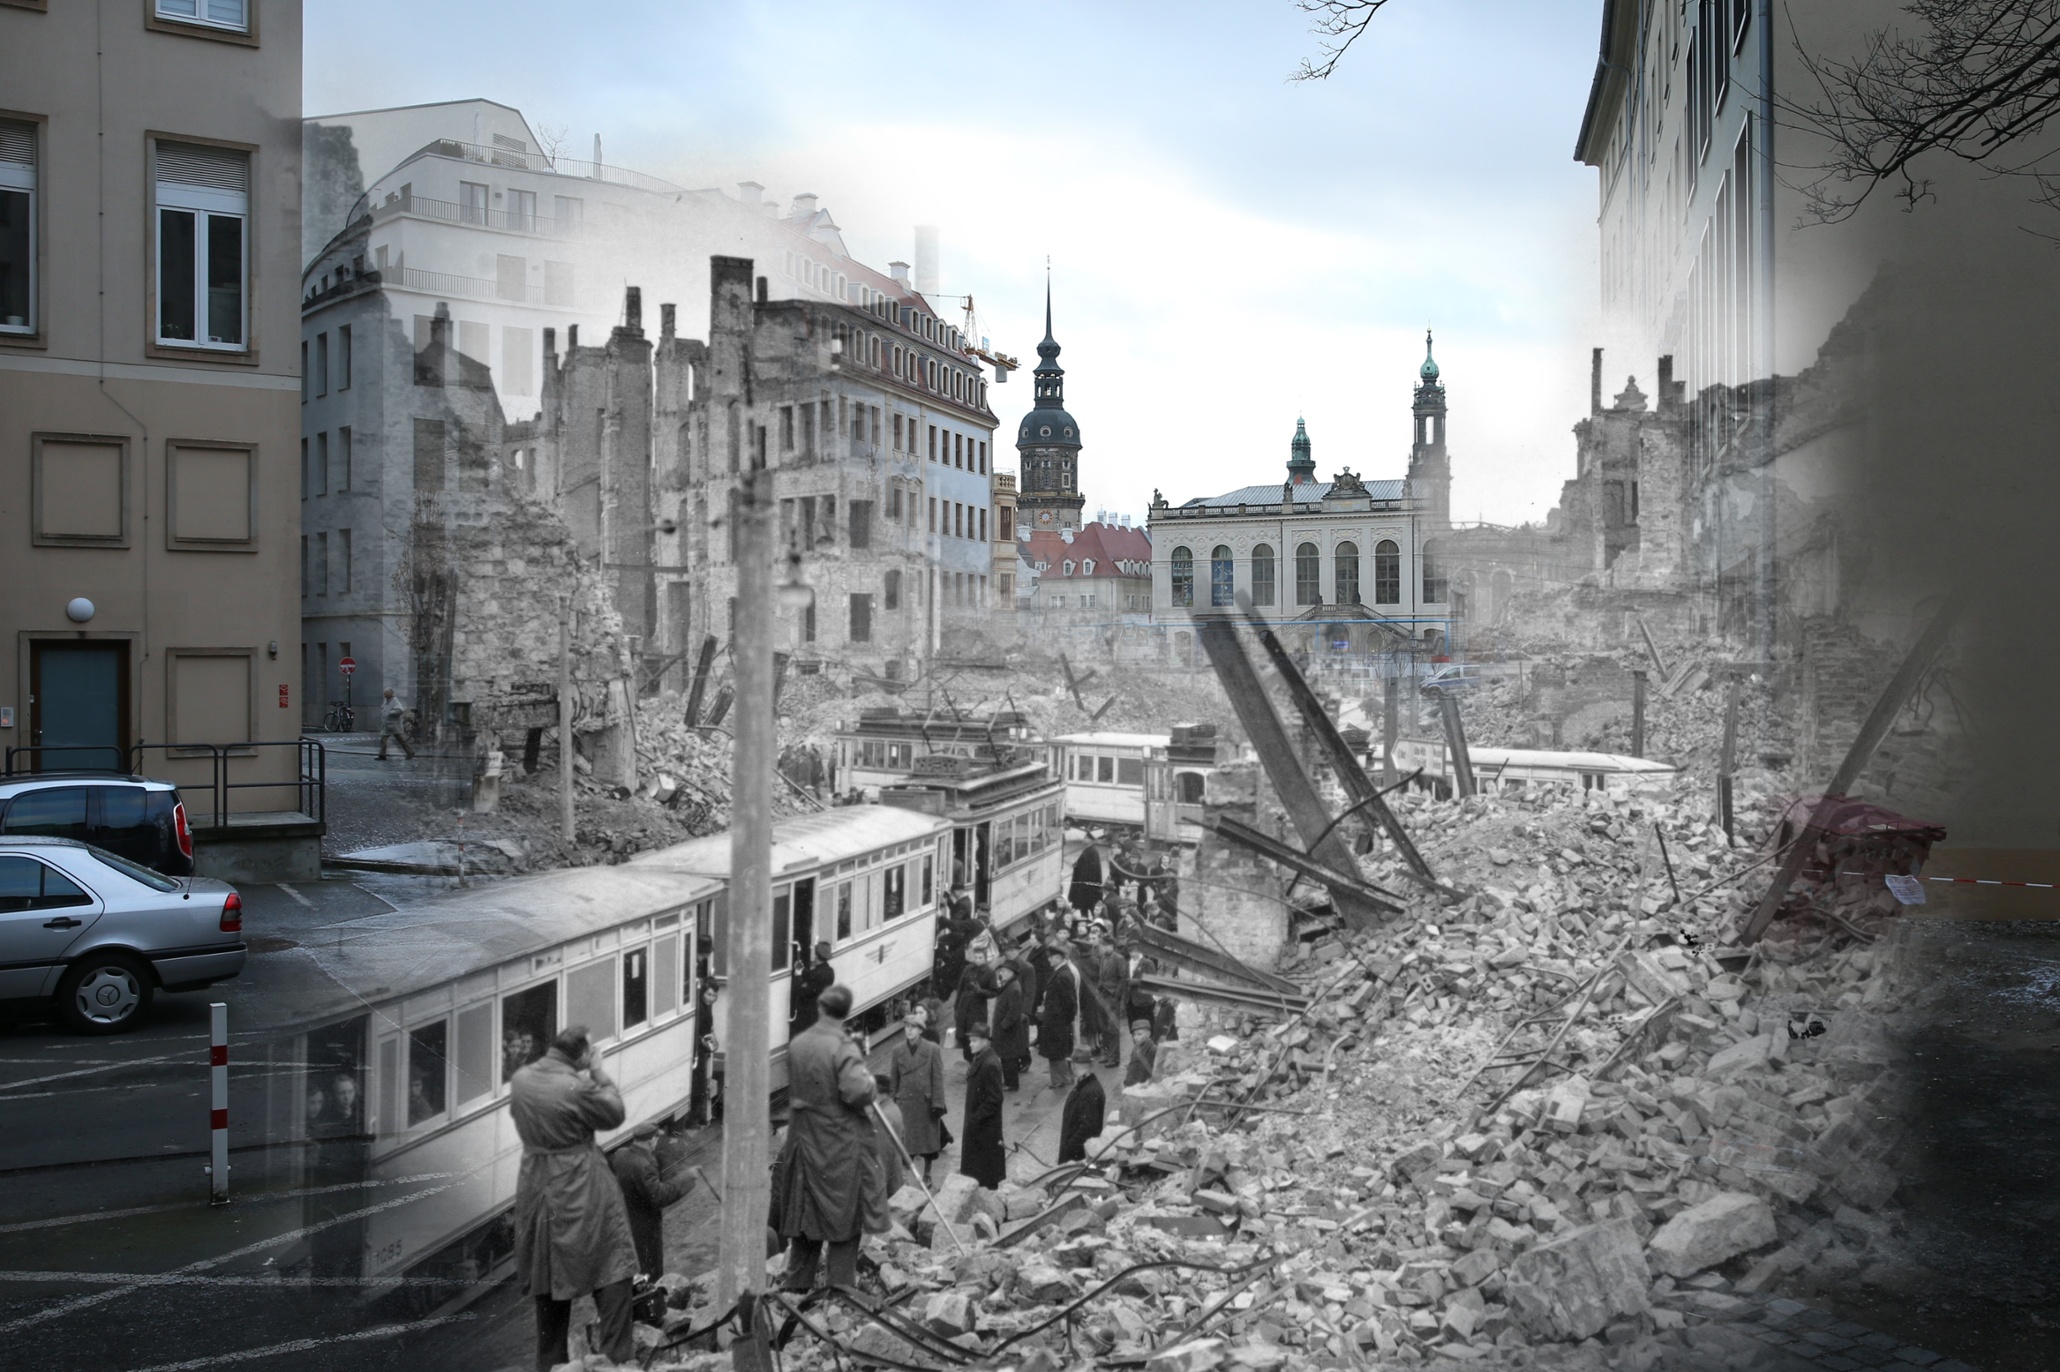 ww2 aftermath bombing cities